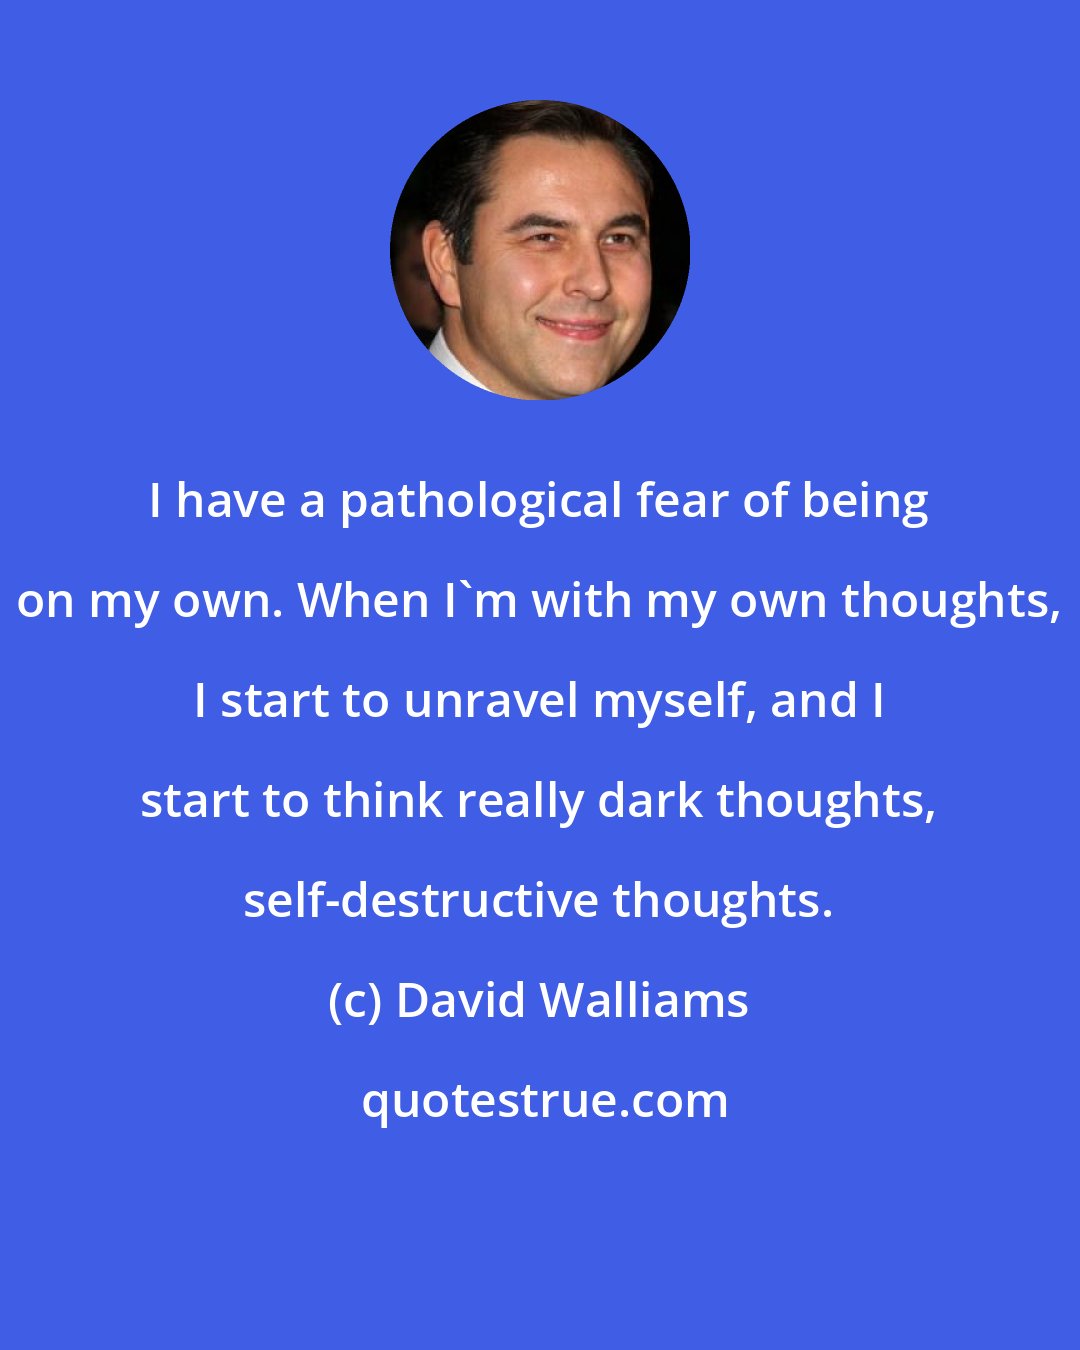 David Walliams: I have a pathological fear of being on my own. When I'm with my own thoughts, I start to unravel myself, and I start to think really dark thoughts, self-destructive thoughts.